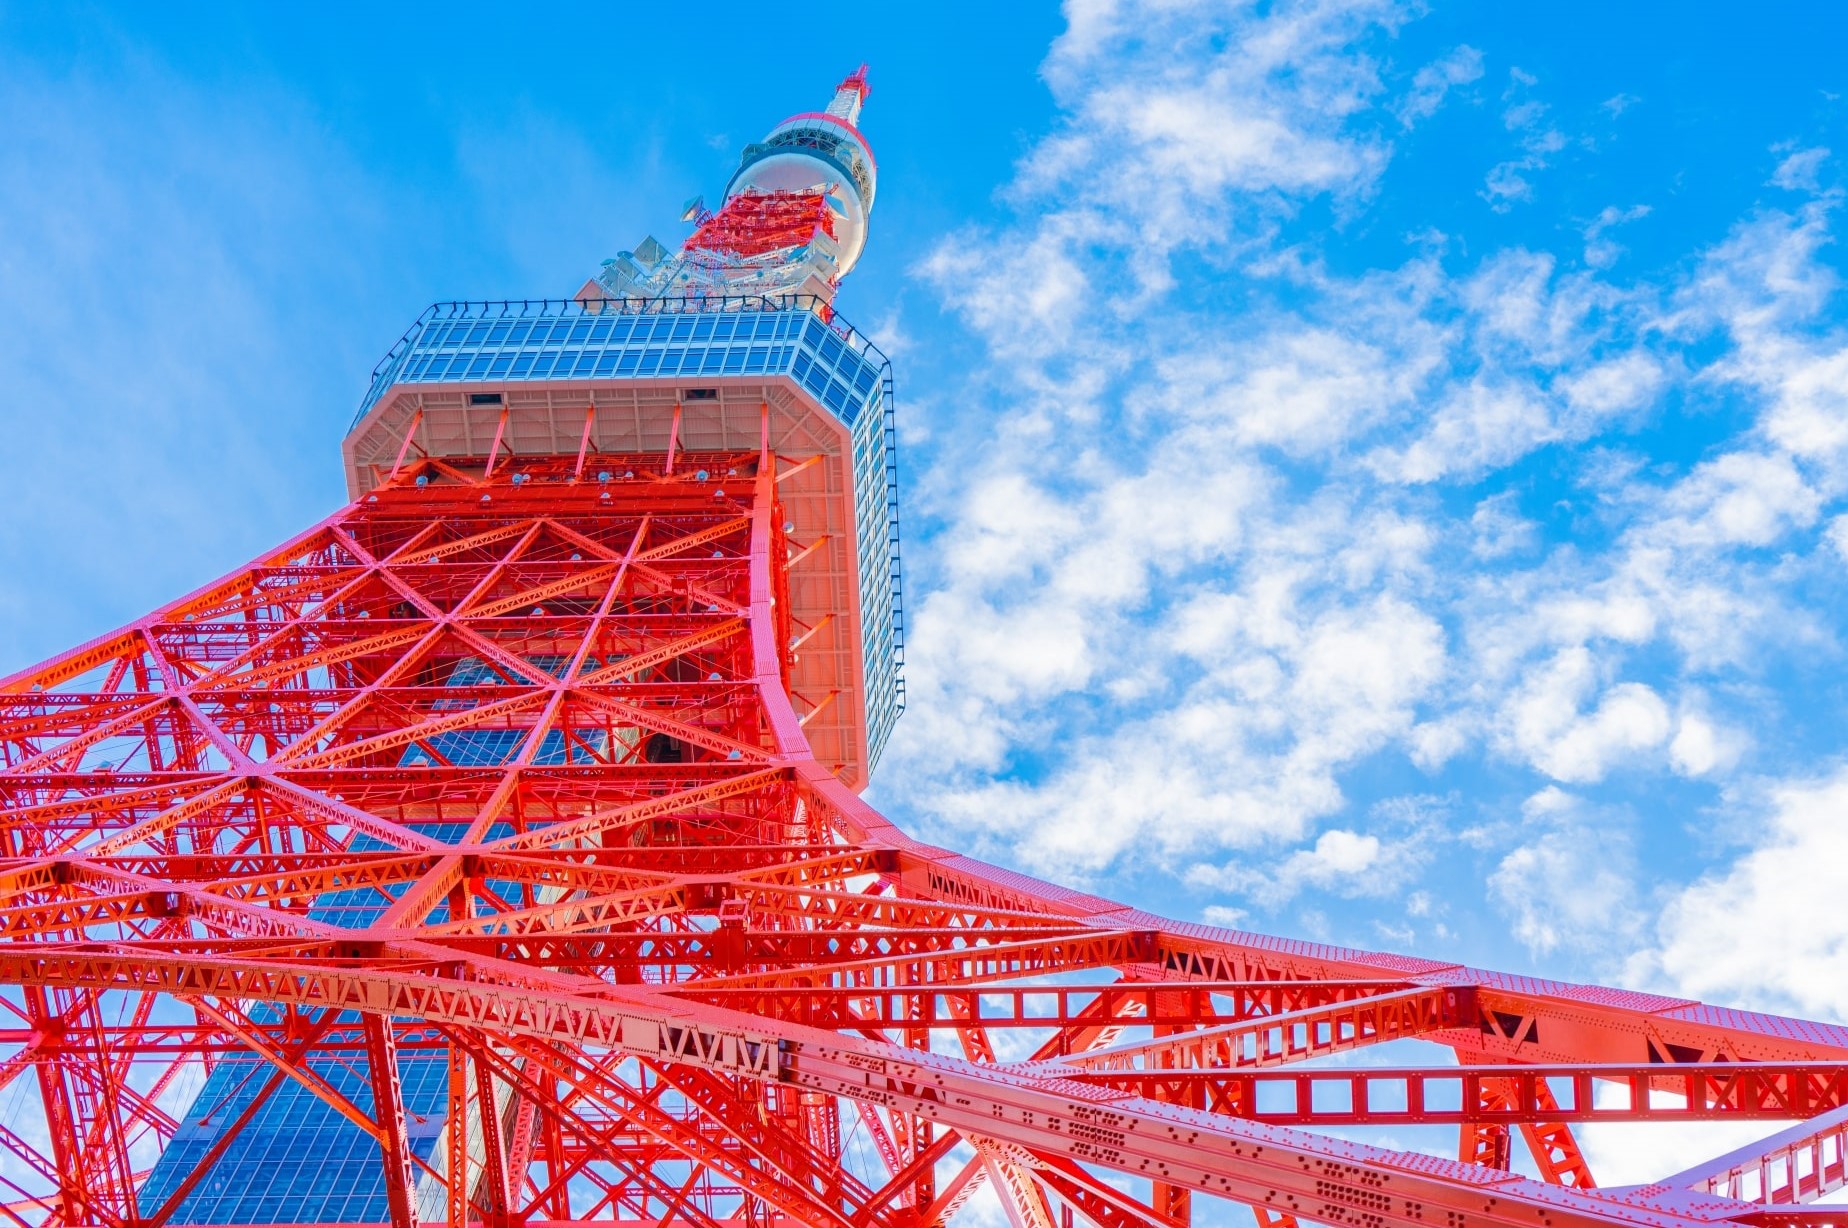 Tokyo Tower rising high up to the blue sky